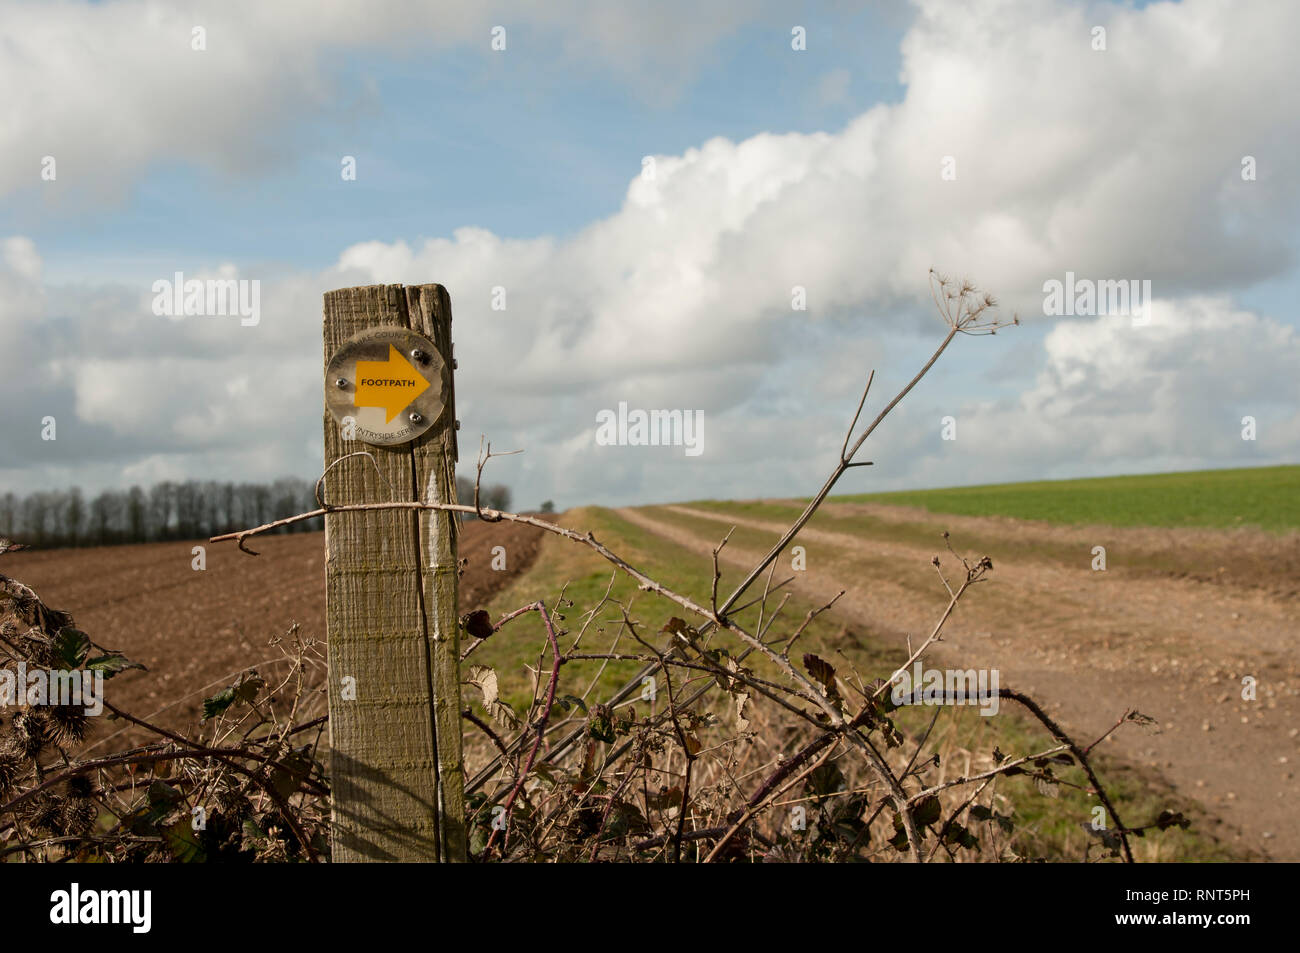 A Footpath sign marker in a rural field beside a farm track Stock Photo